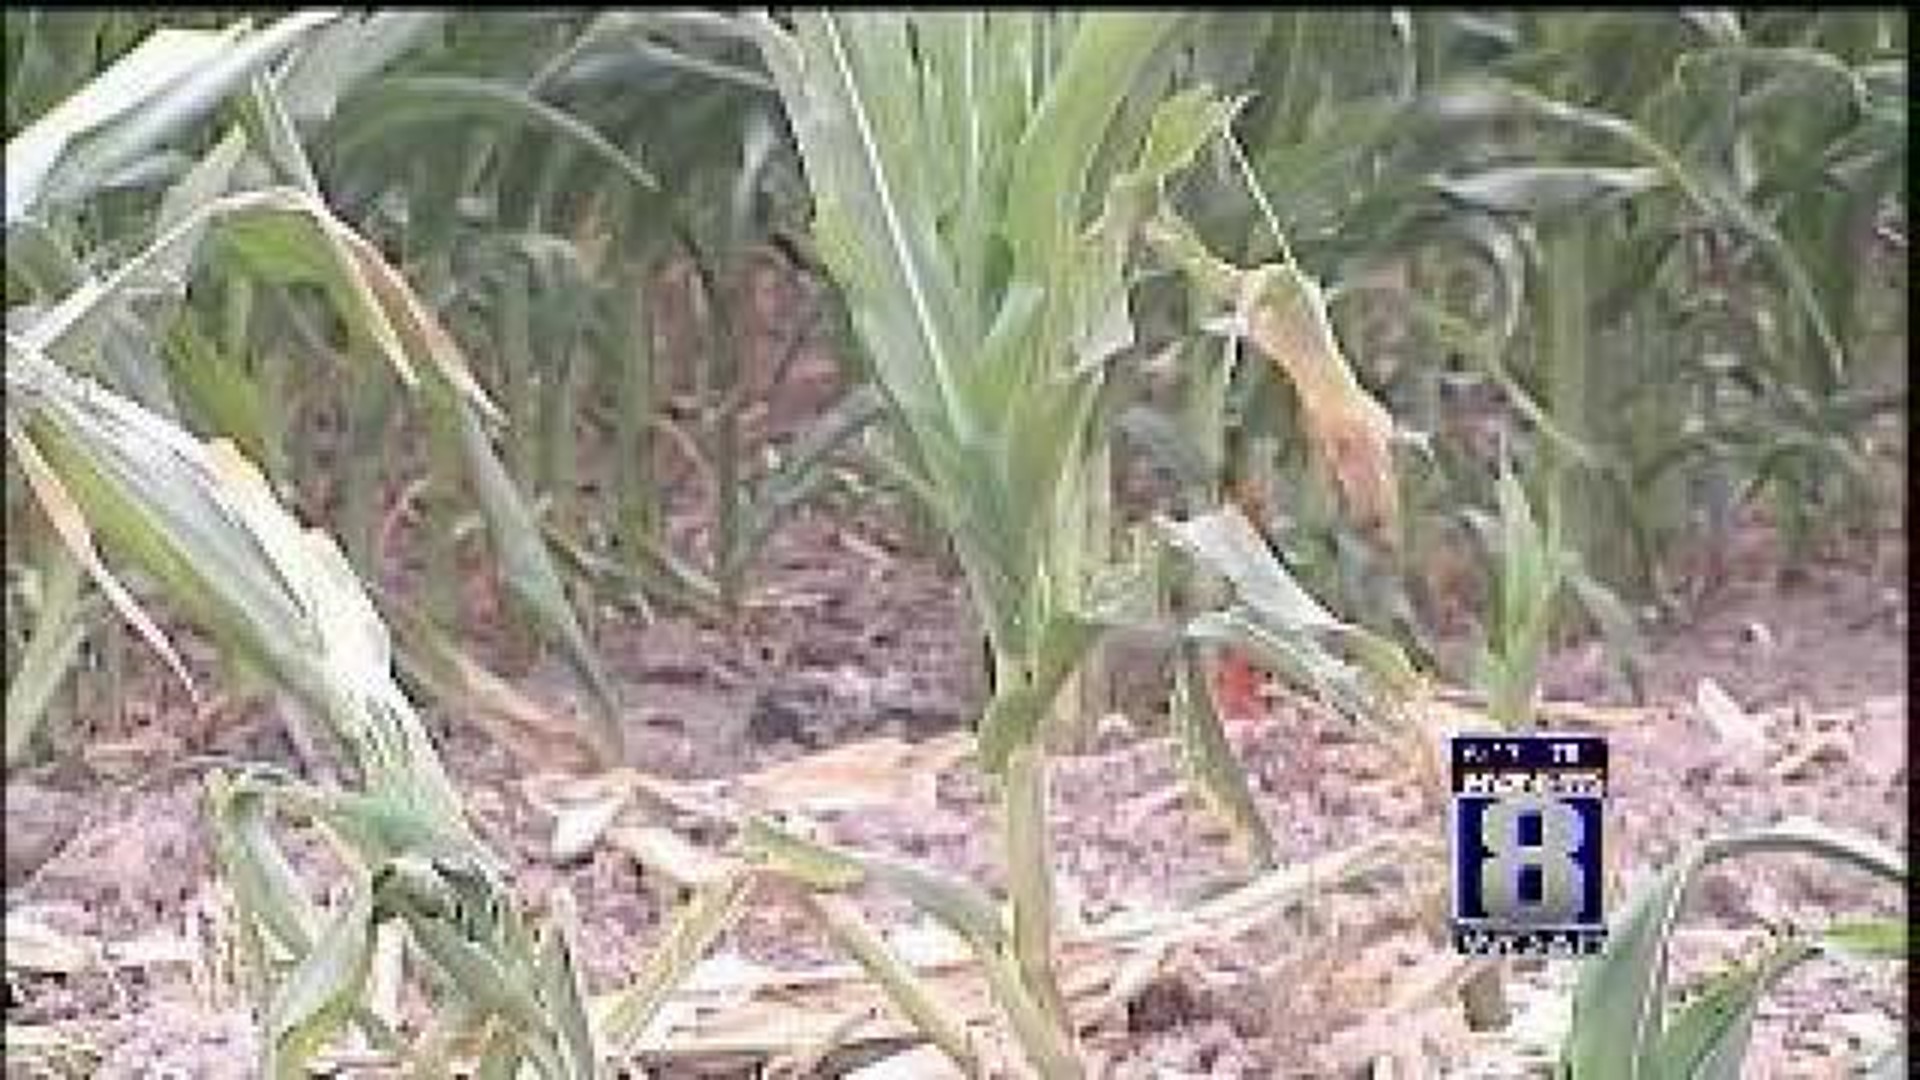 Ag in the AM: Deteriorating Farm Conditions